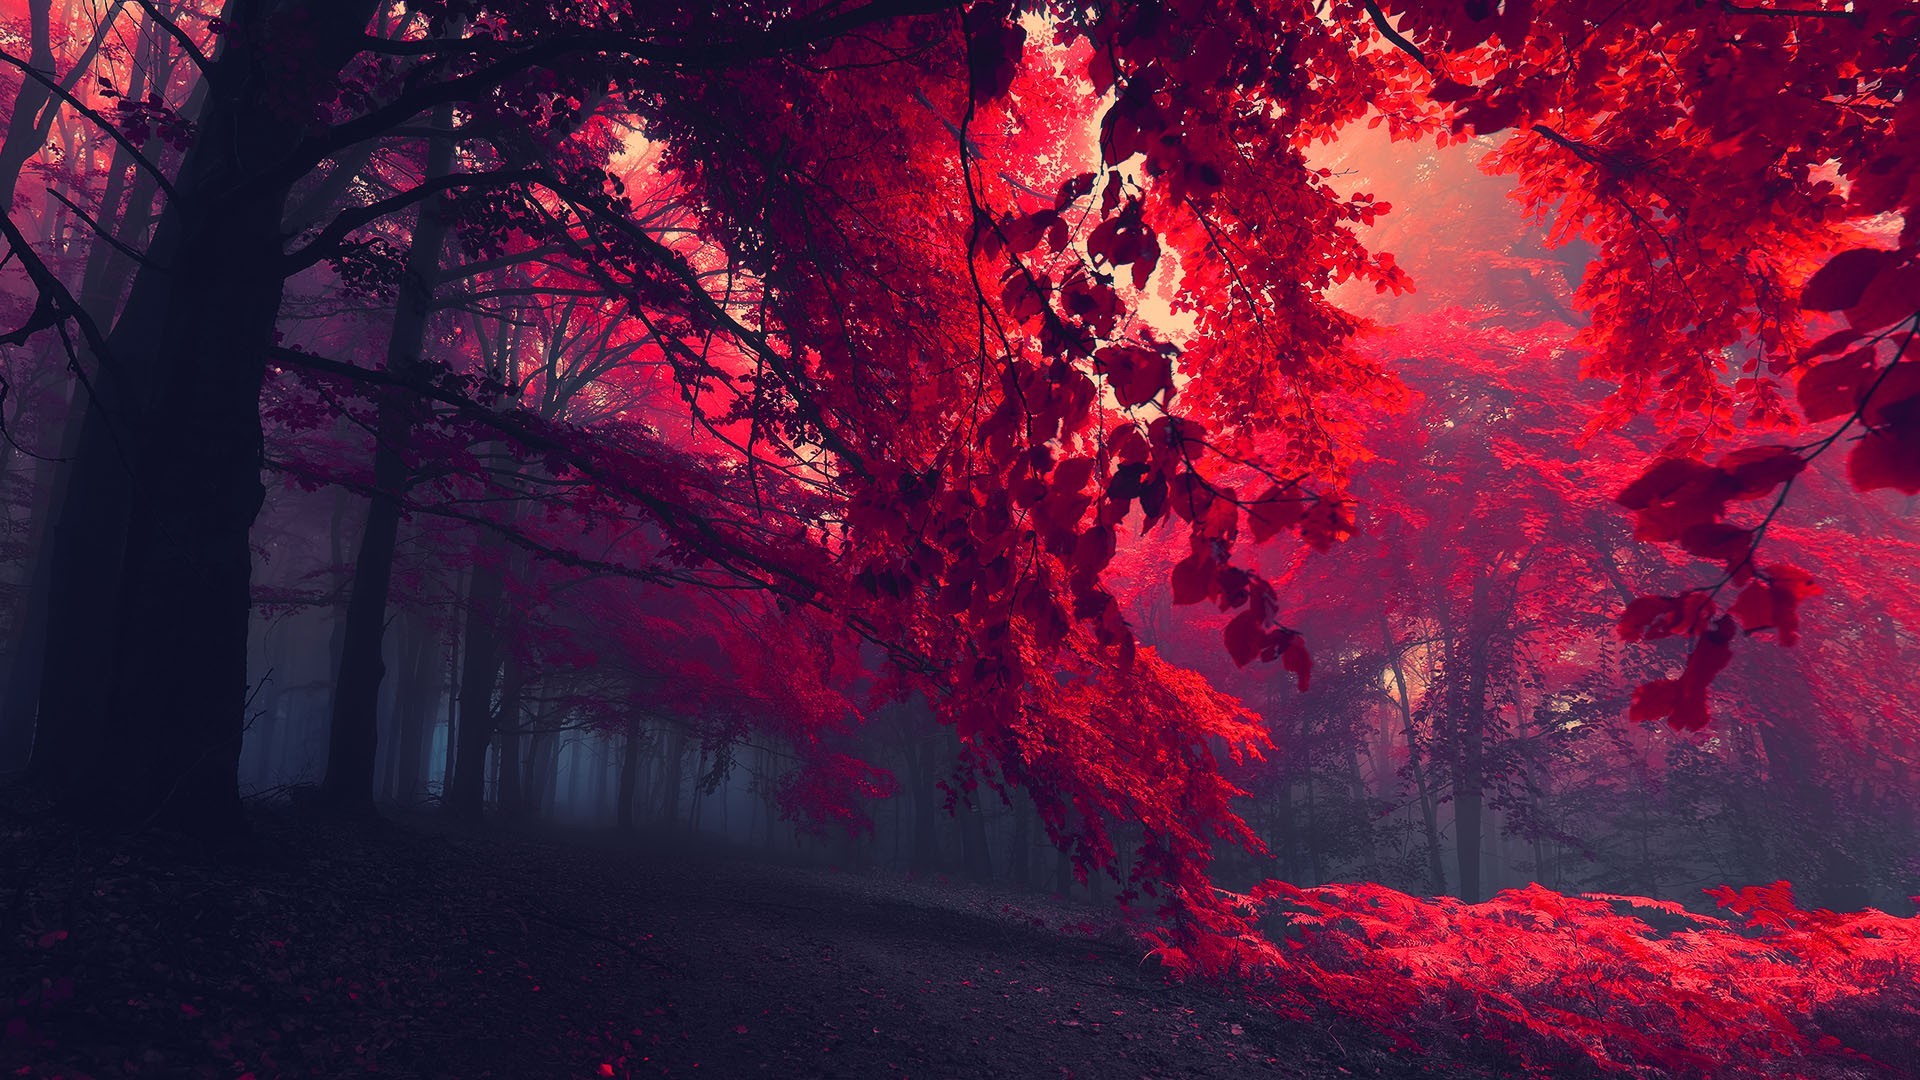 Dark Red Nature Forest Trees Red Leaves Mist Fall Landscape Leaves Plants Fallen Leaves 1920x1080